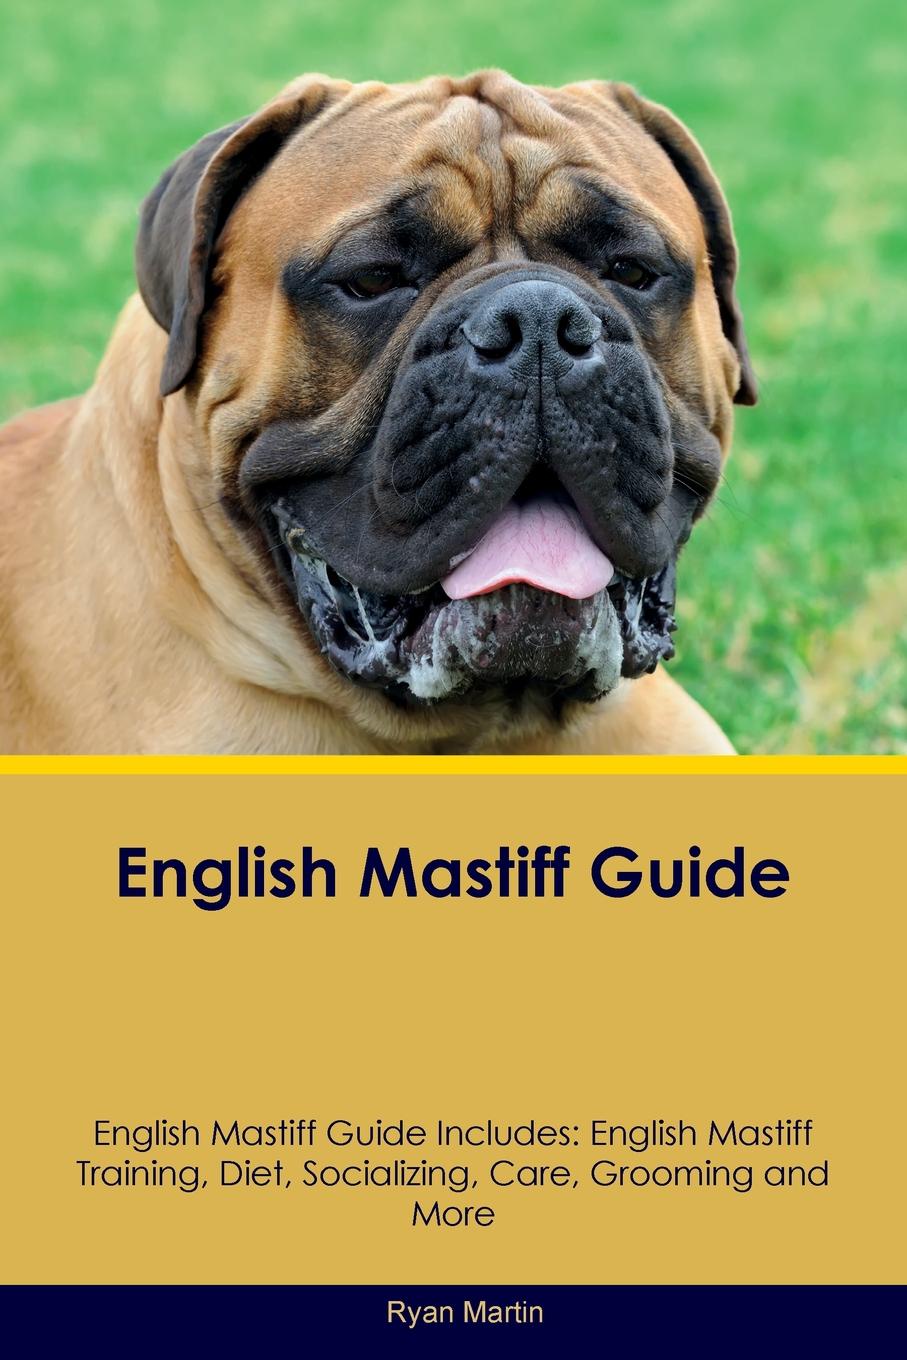 English Mastiff Guide English Mastiff Guide Includes. English Mastiff Training, Diet, Socializing, Care, Grooming, Breeding and More